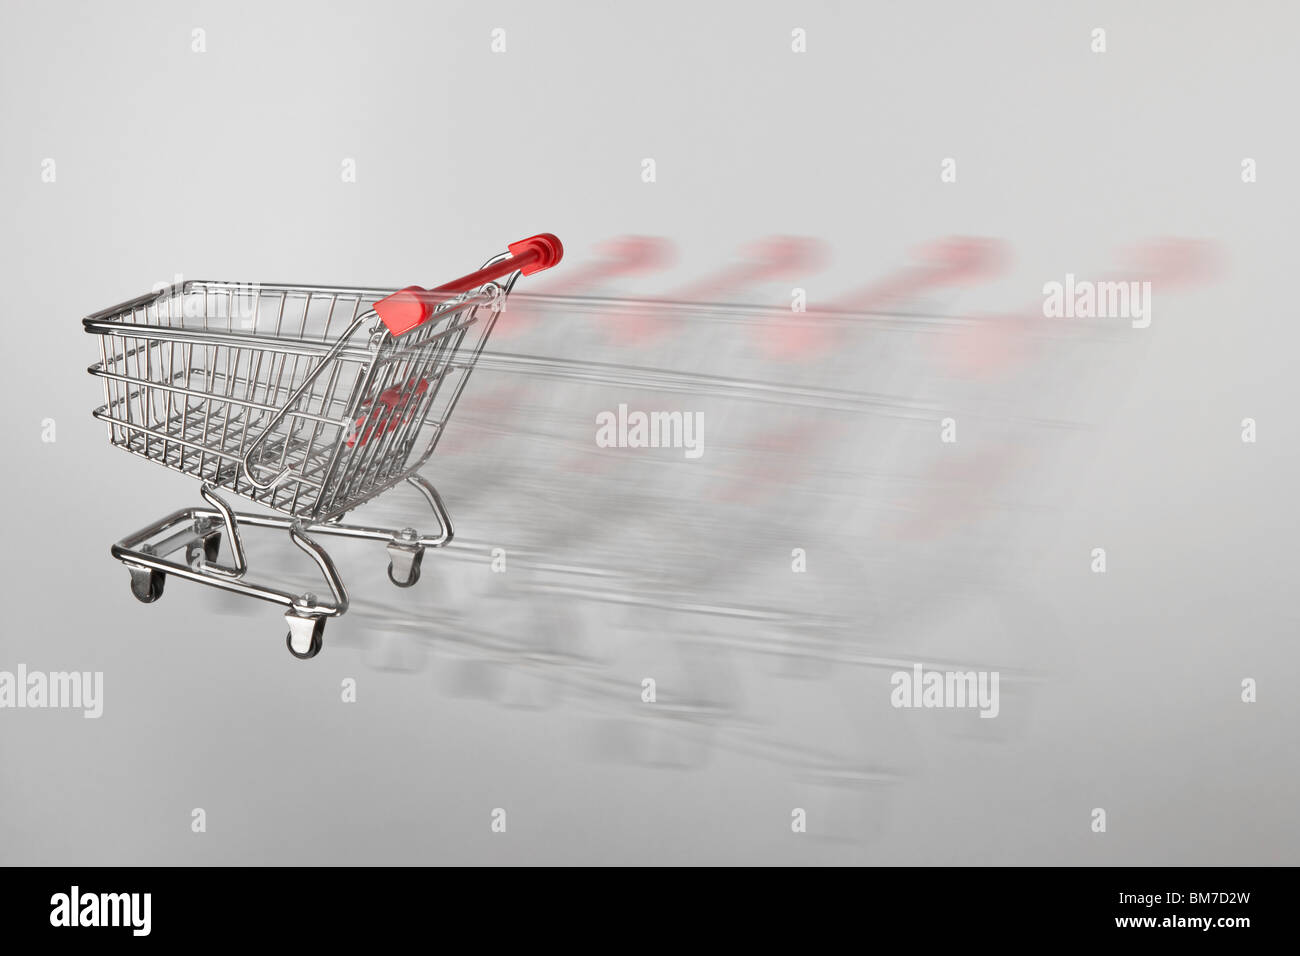 A miniature shopping cart on the move Stock Photo